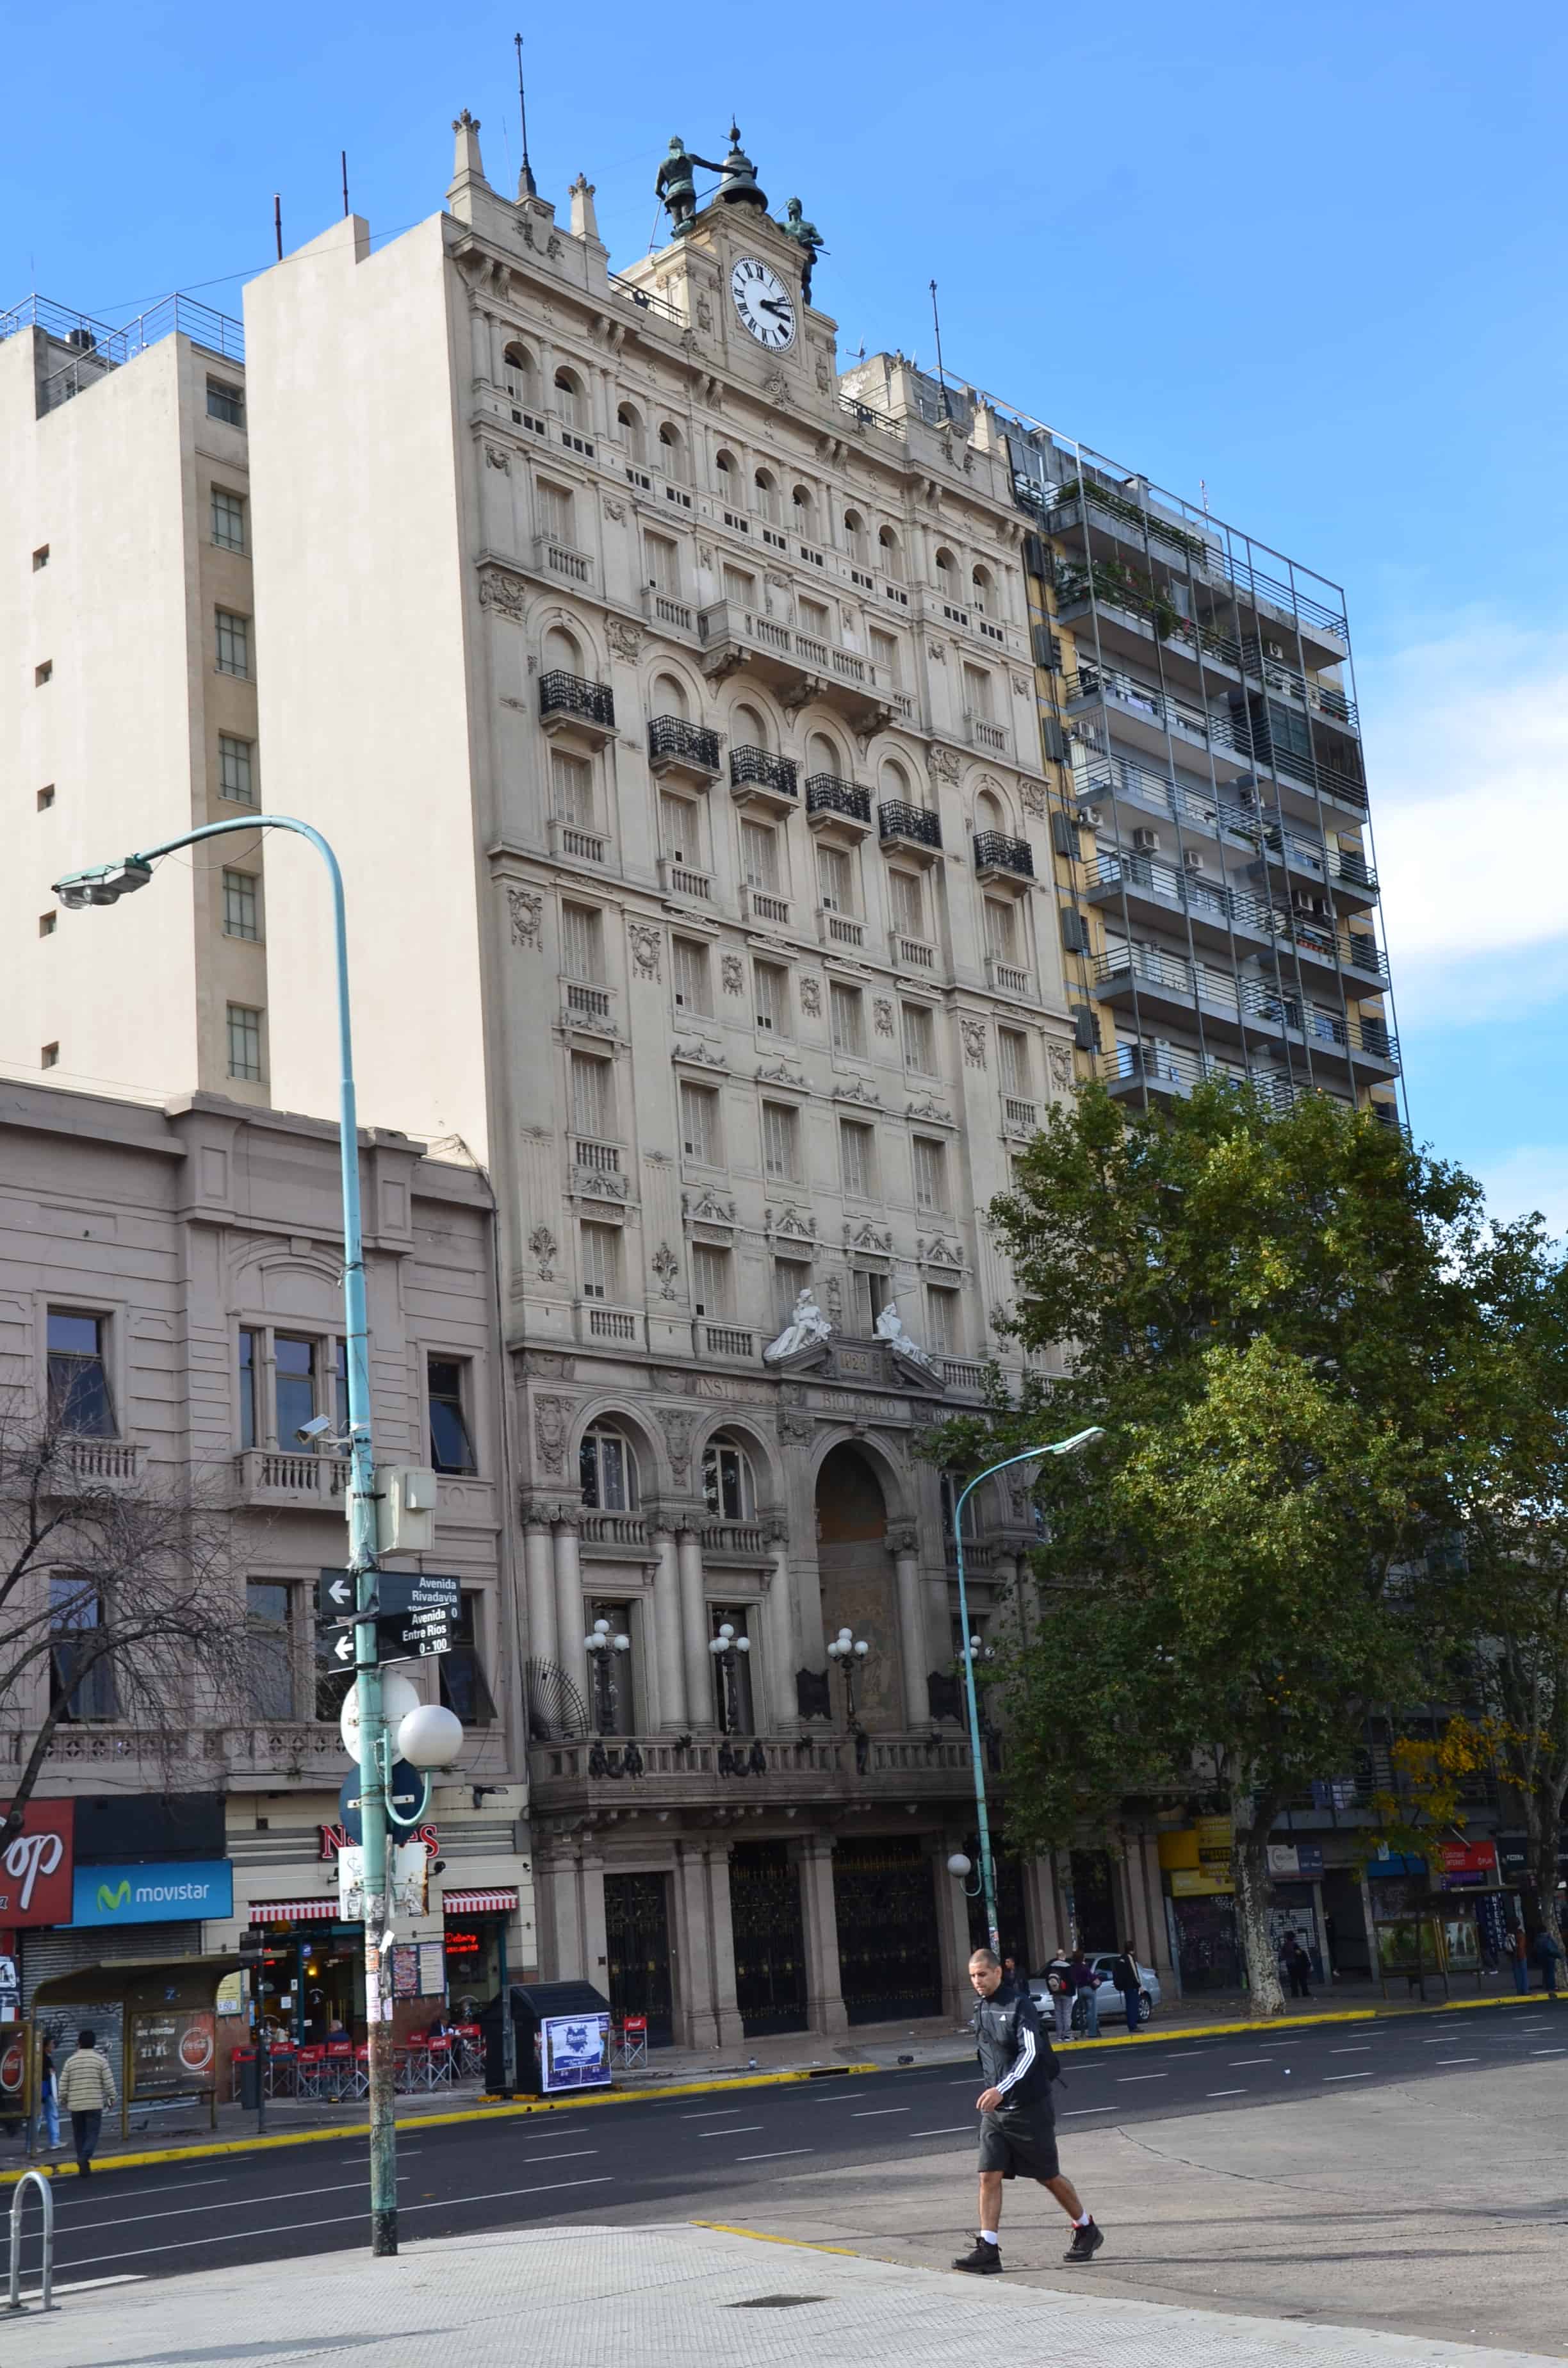 General Auditor's Office in Buenos Aires, Argentina